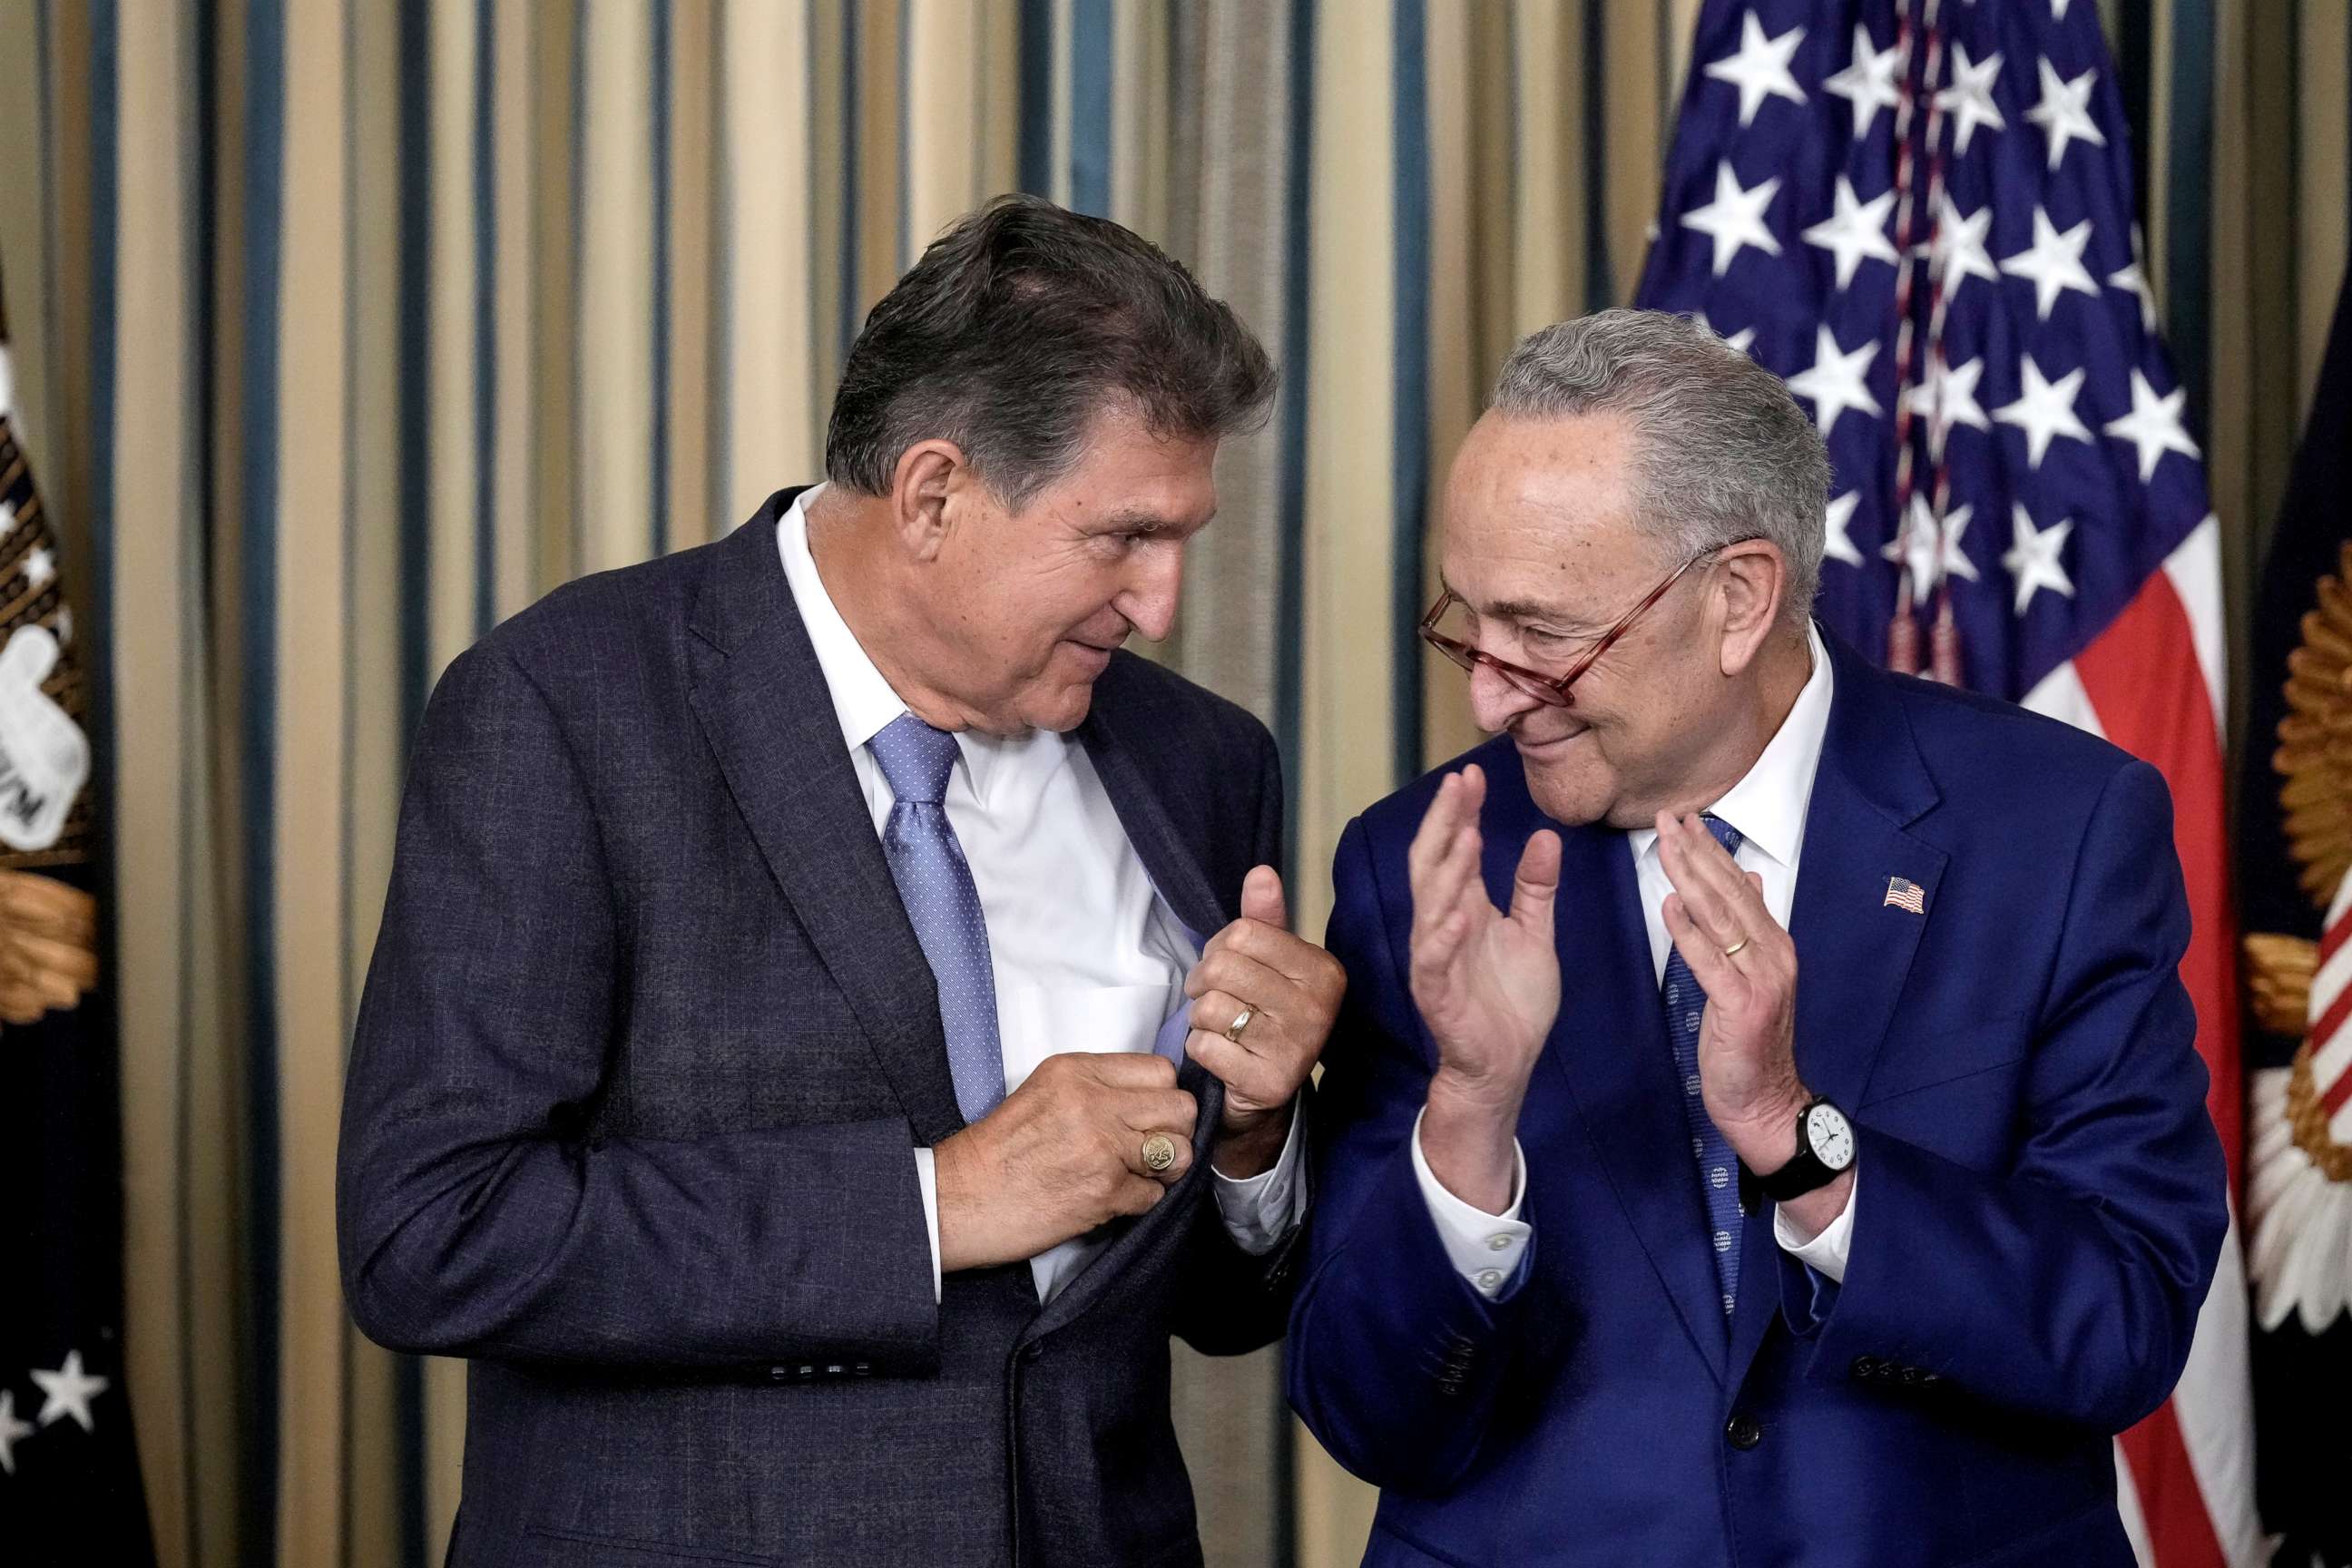 PHOTO: Sen. Joe Manchin looks to Senate Majority Leader Chuck Schumer after U.S. President Joe Biden signs The Inflation Reduction Act in the State Dining Room of the White House August 16, 2022 in Washington, DC.